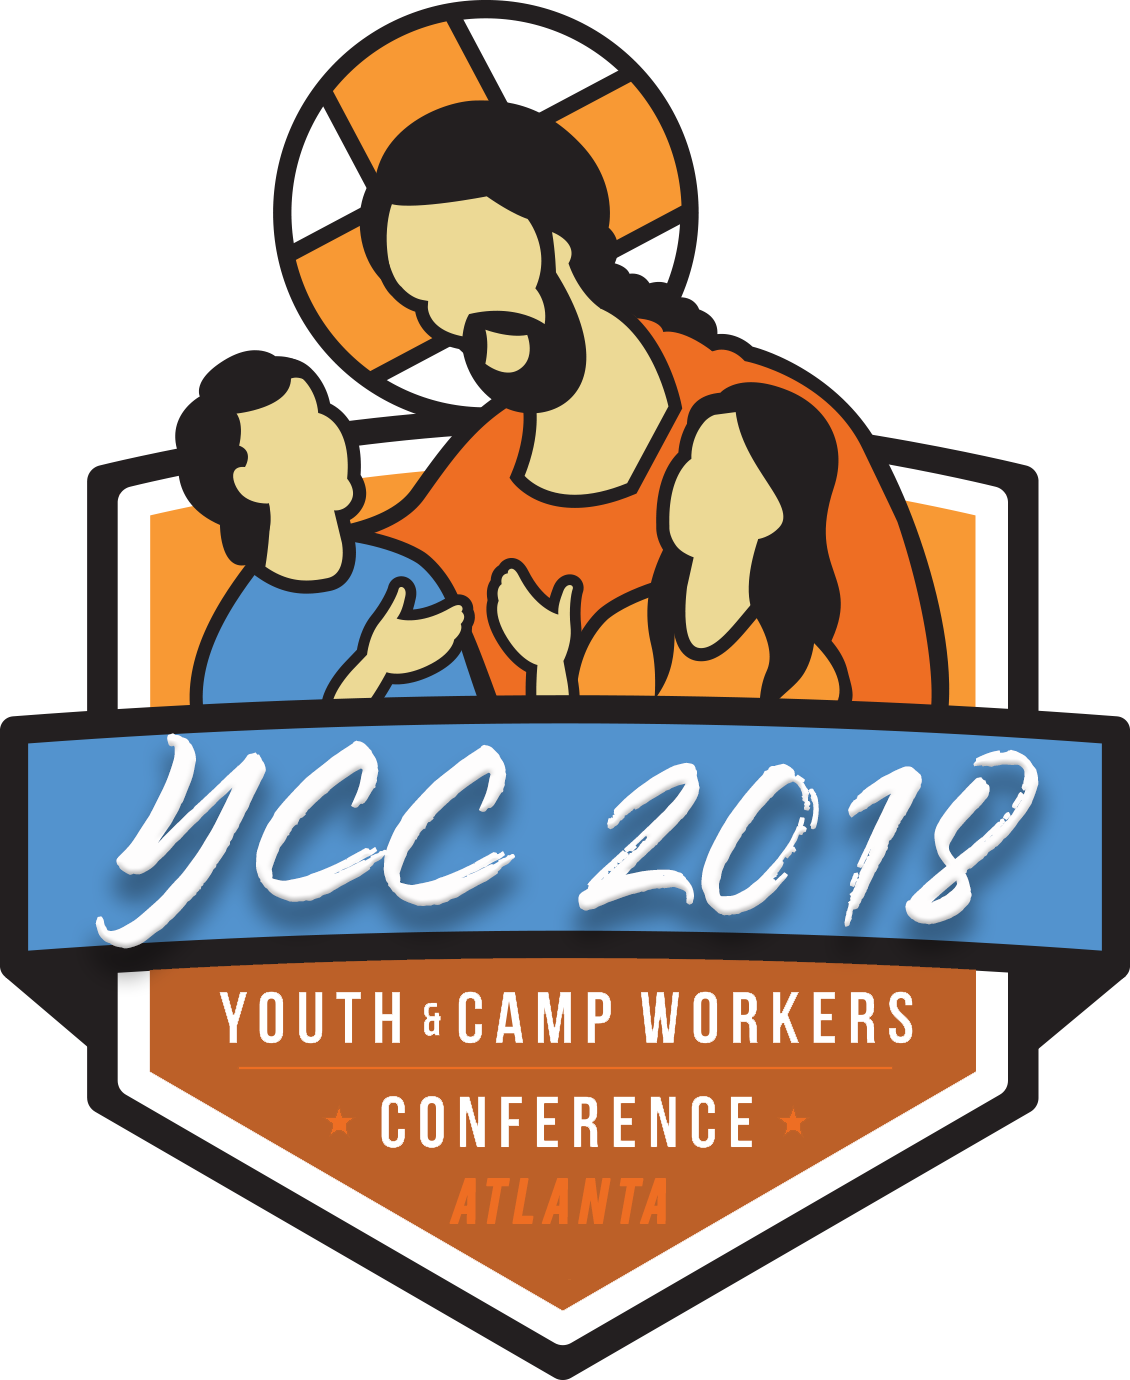 Orthodox Youth & Camping Conference - Regeneration By Pat Barker (1130x1380)